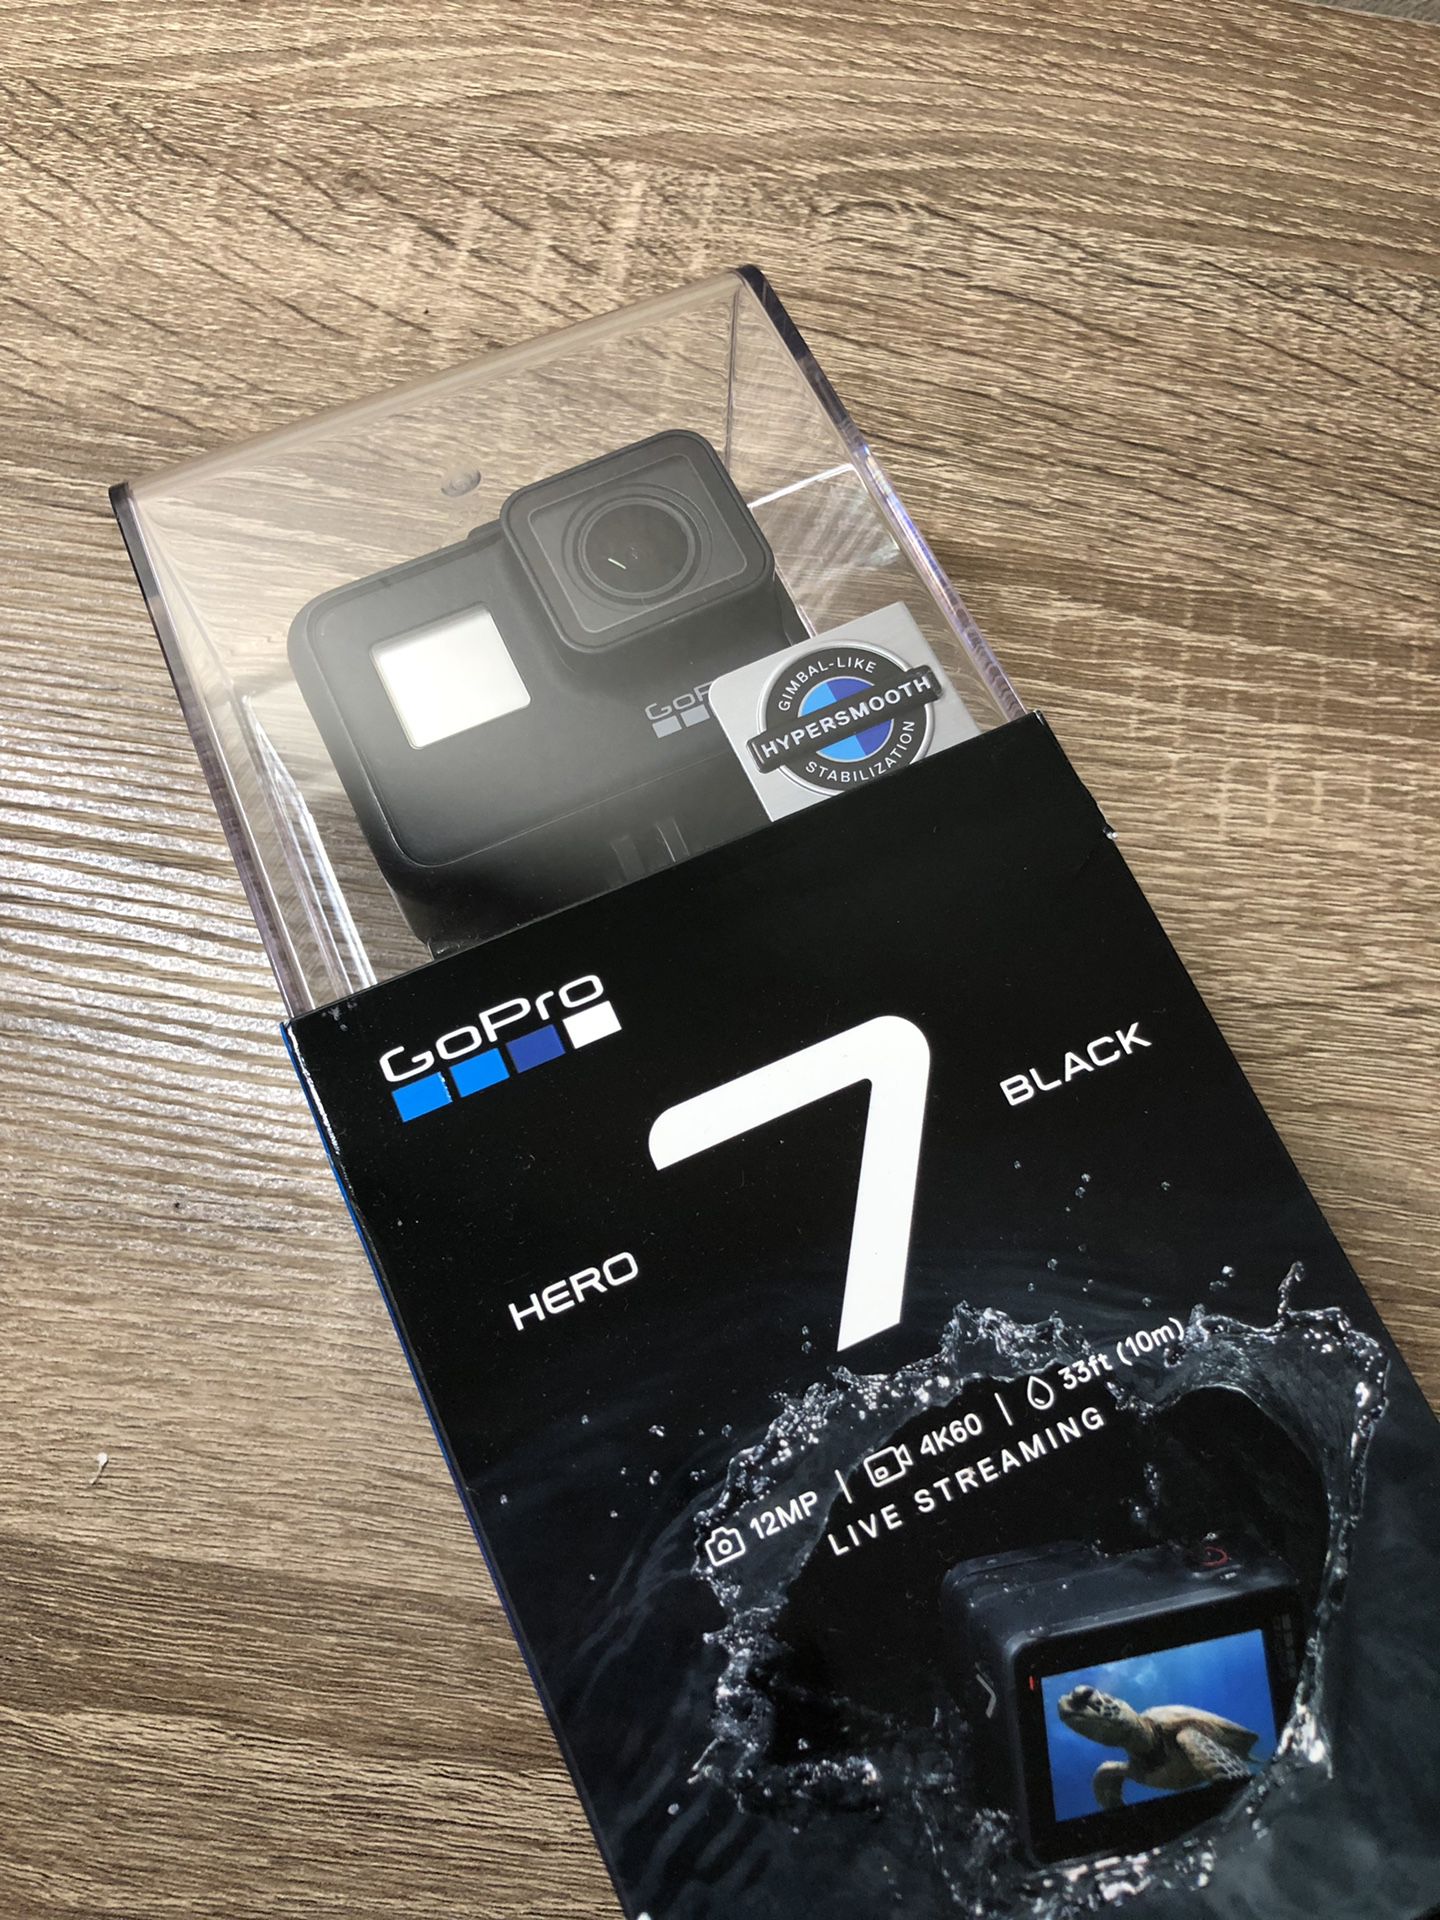 GoPro Hero 7 with accessories and battery charger